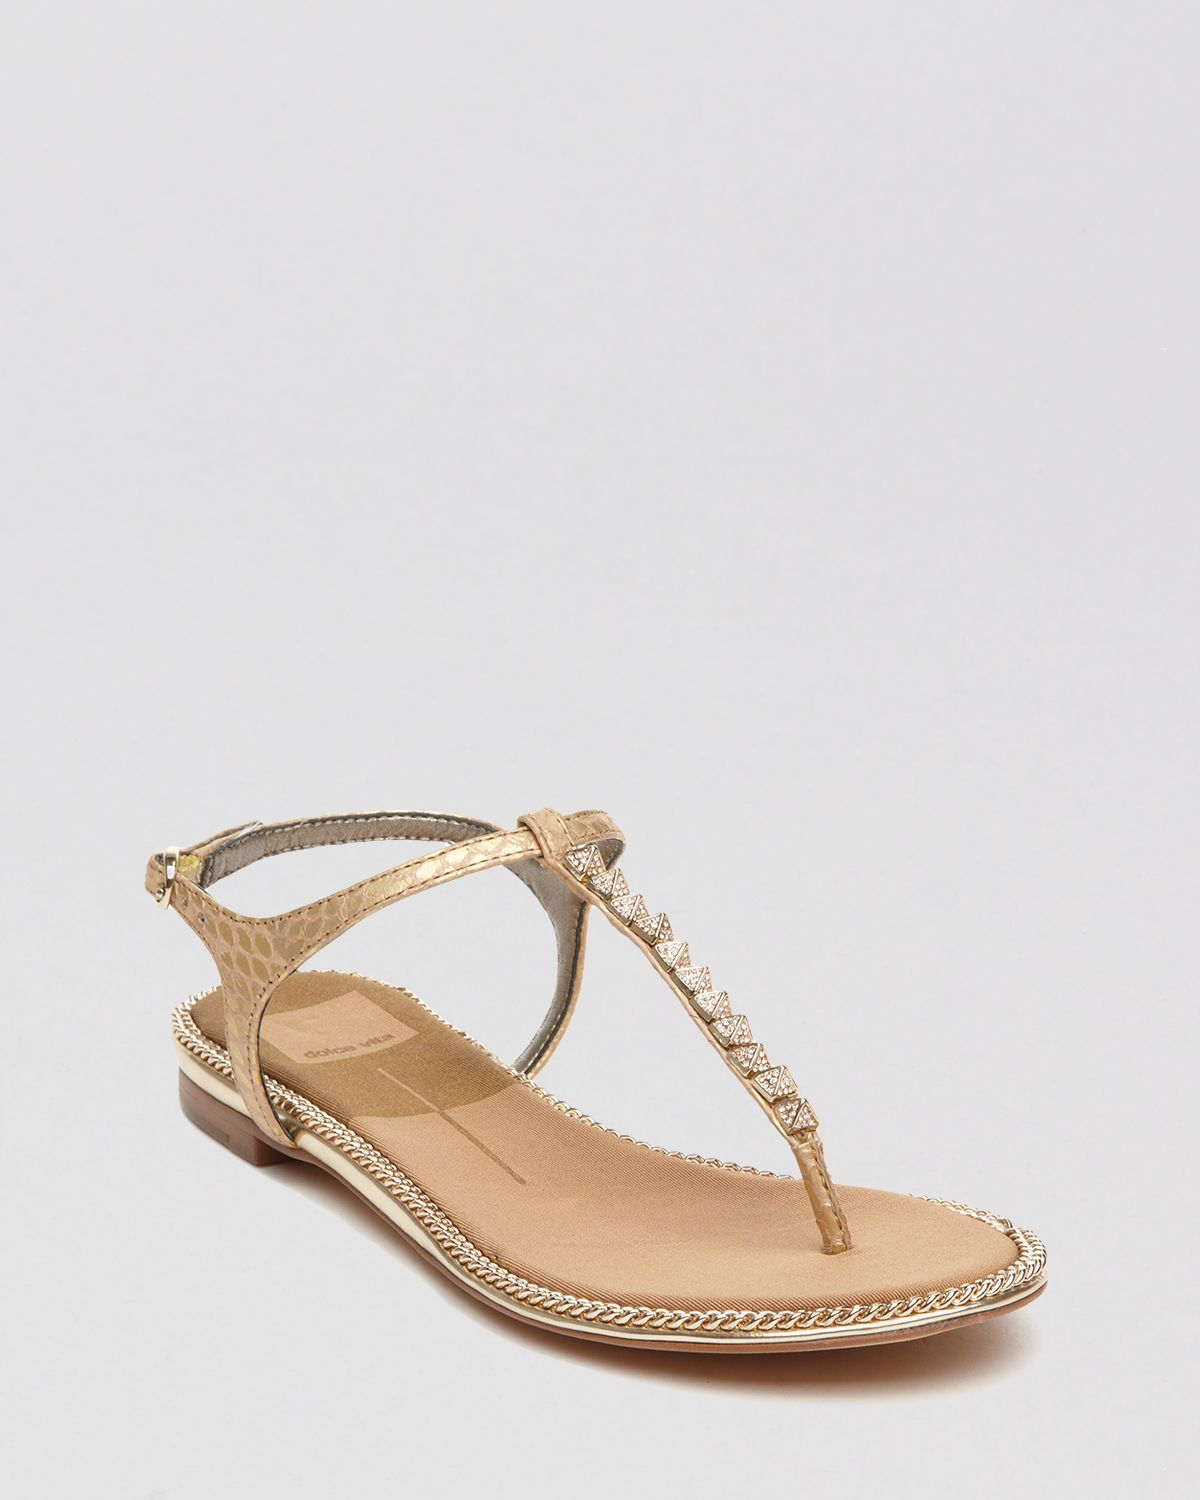 Dolce Vita Flat Thong Sandals Ensley Studded T Strap in Gold | Lyst